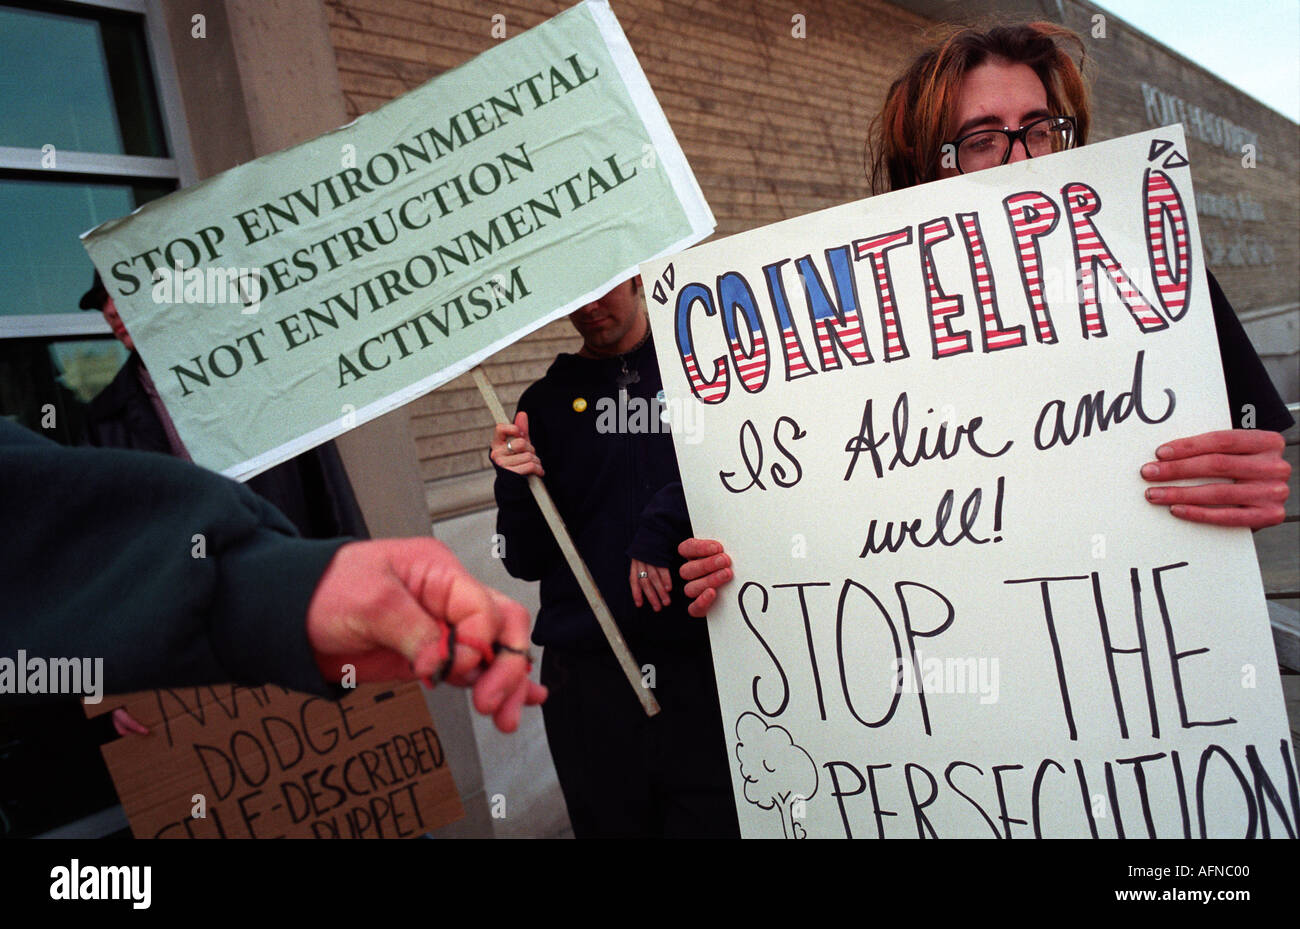 Protesters hold signs protesting FBI surveillance on American activists involved in activities of Earth First! and other groups. Stock Photo